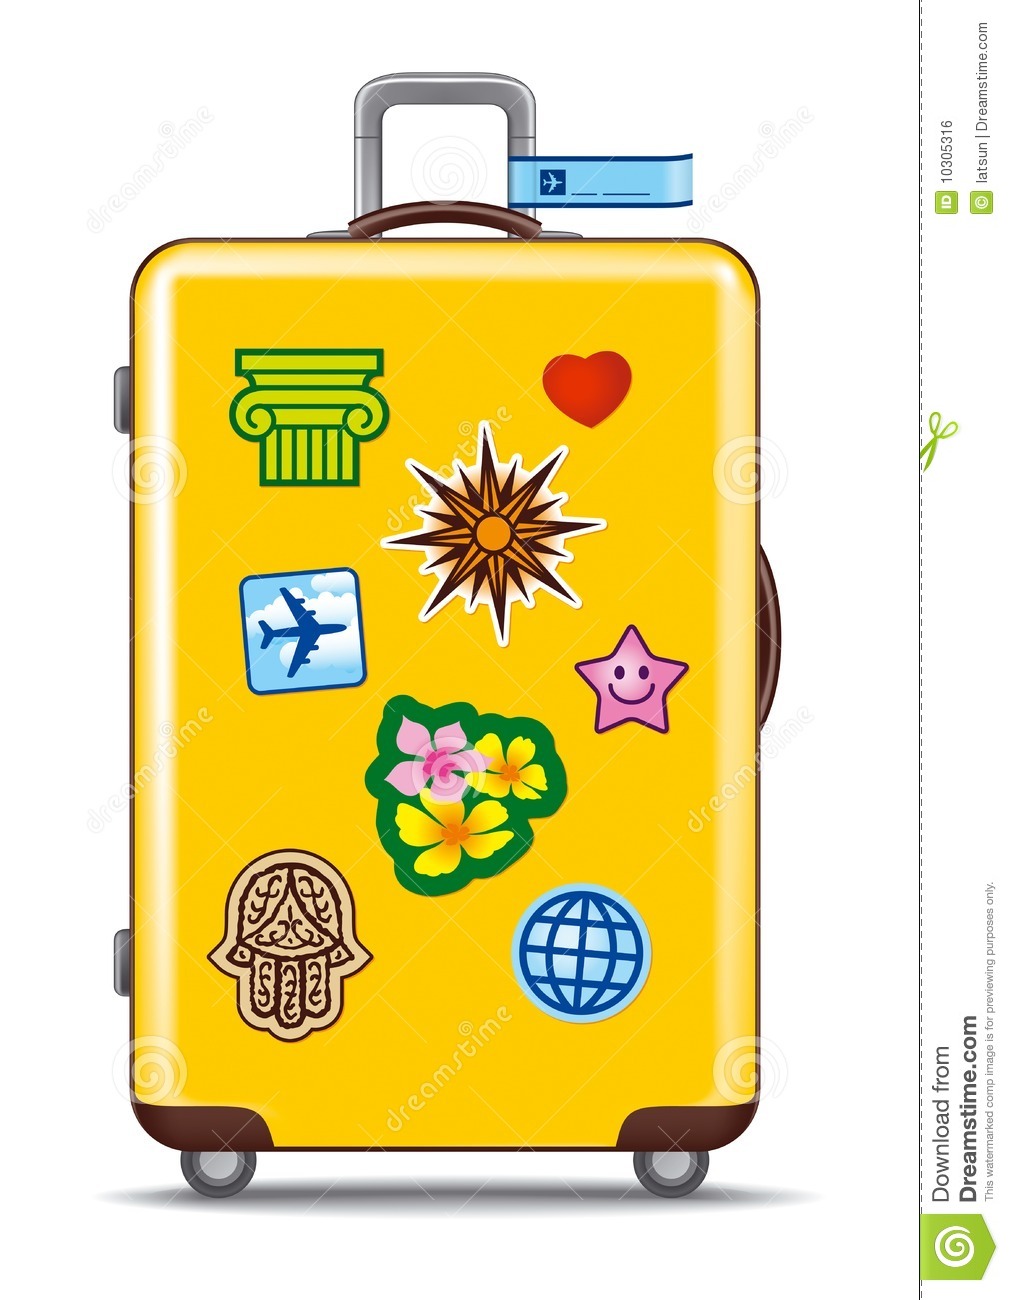 Suitcase For Travel With Stickers Royalty Free Stock Image   Image